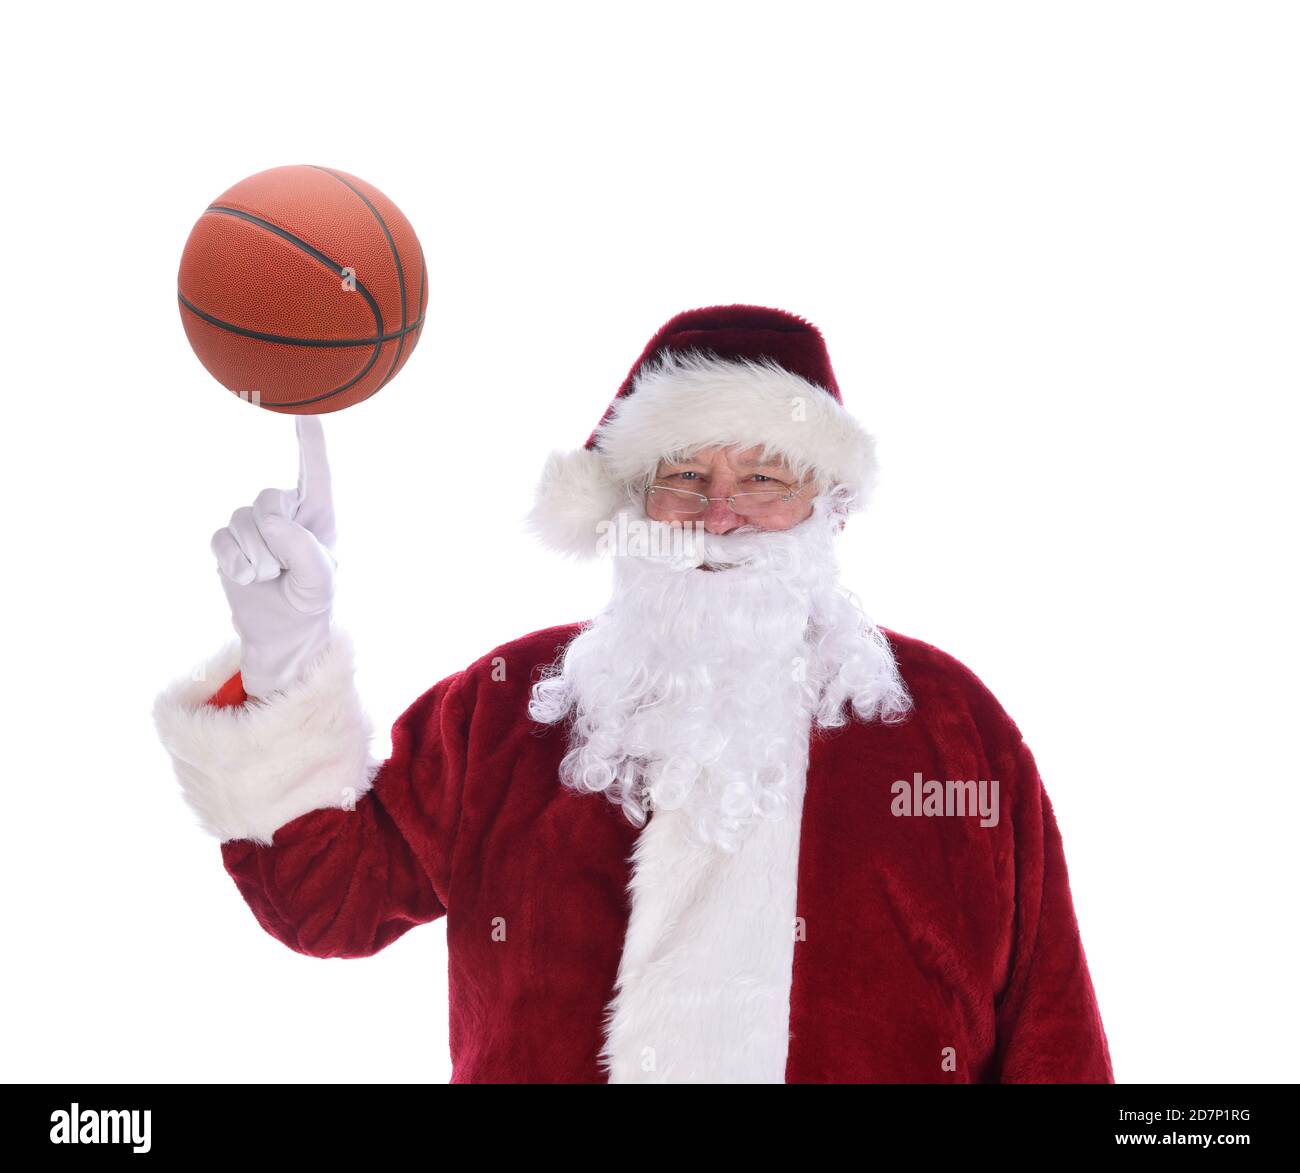 Santa Claus with his index finger pointing up with a basketball balanced on the tip, isolated on white. Stock Photo